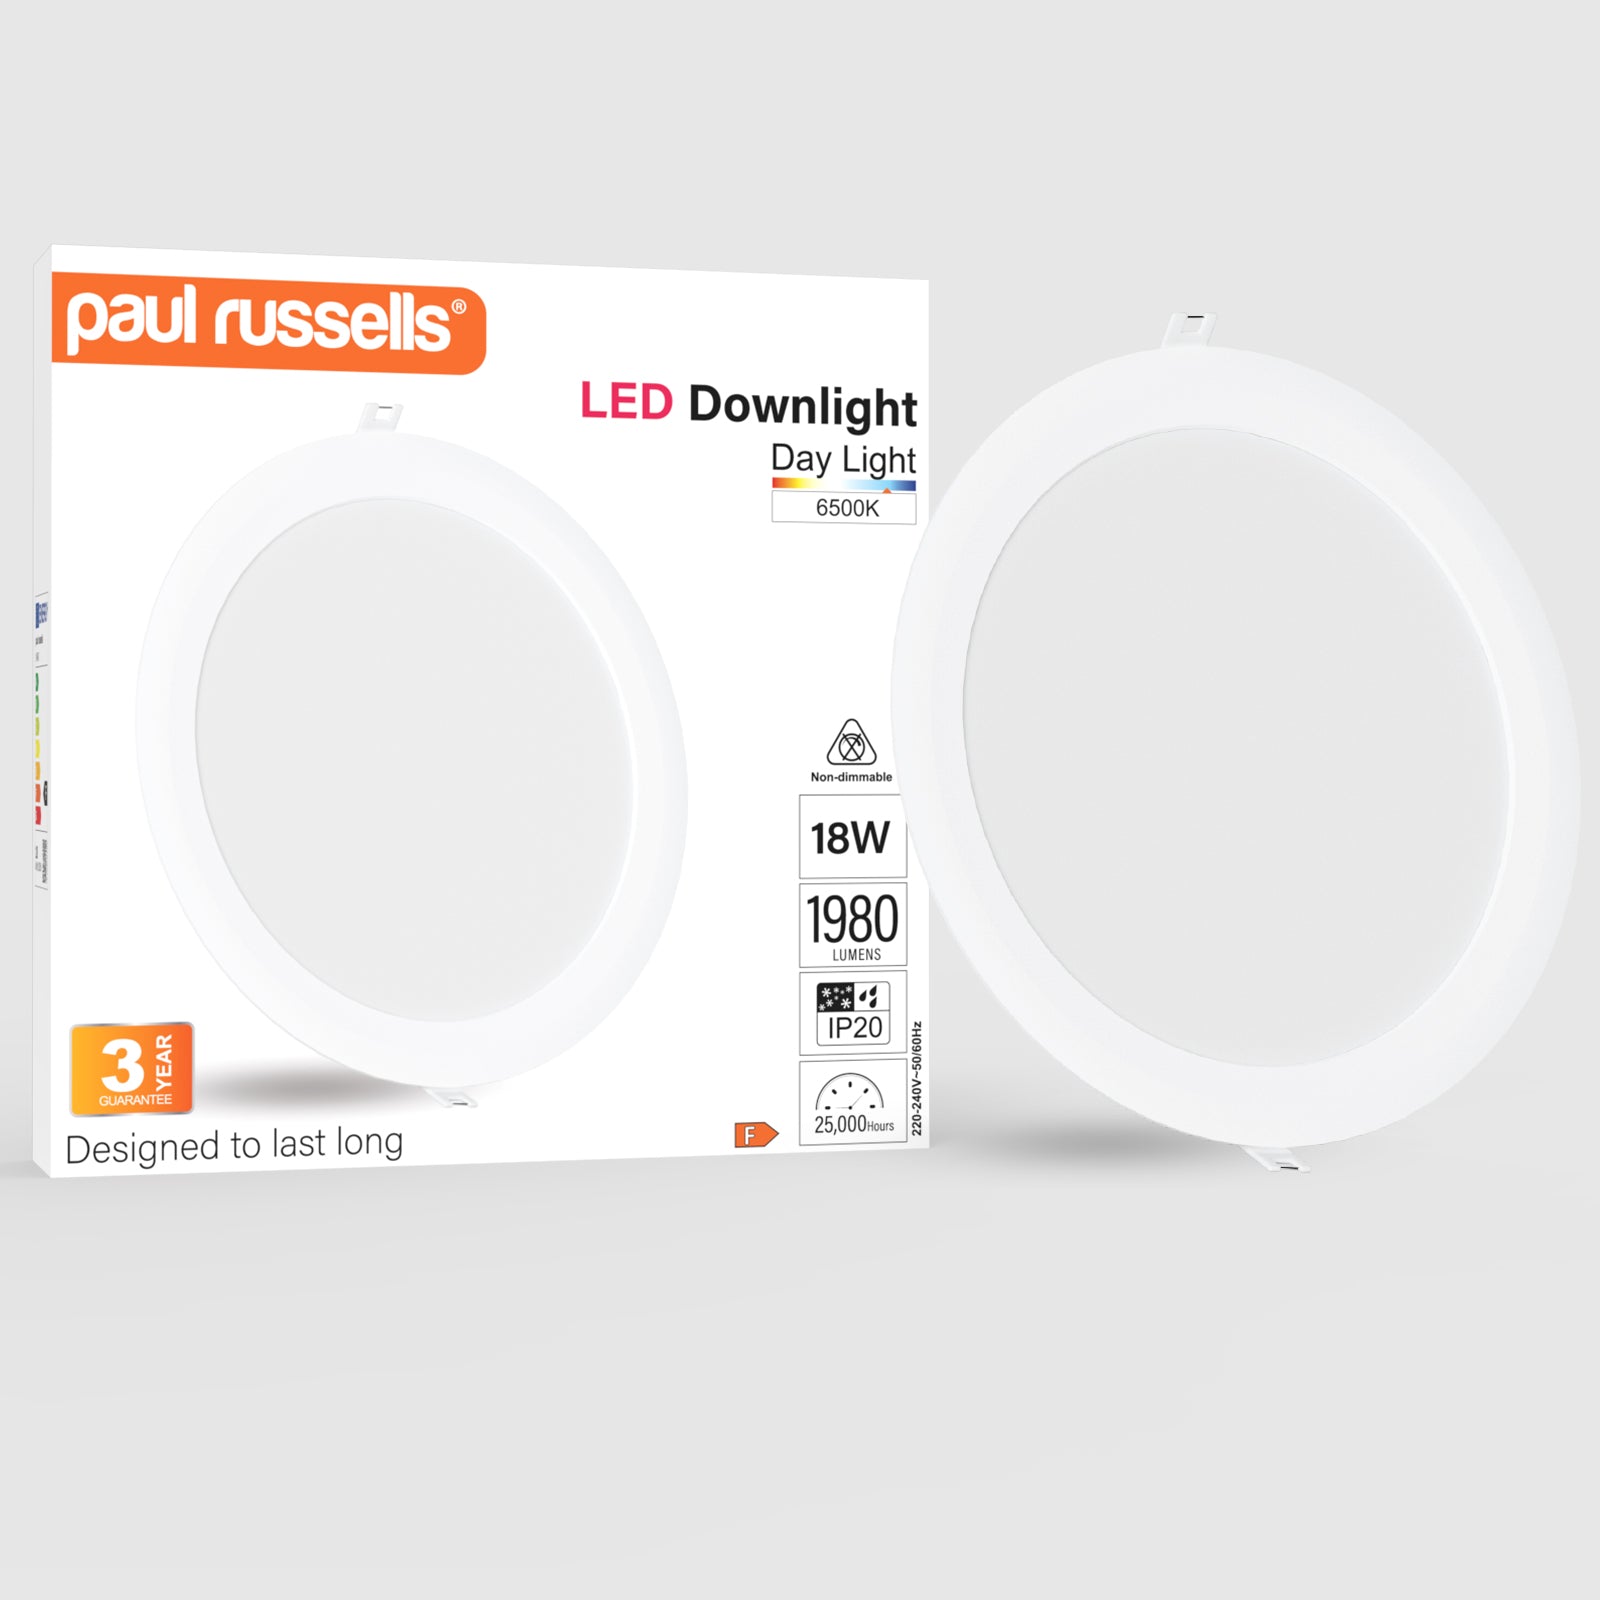 18W, LED Round Ceiling Downlights, 1980 Lumens, 6500K Day Light, Non-Dimmable Panel Spotlights